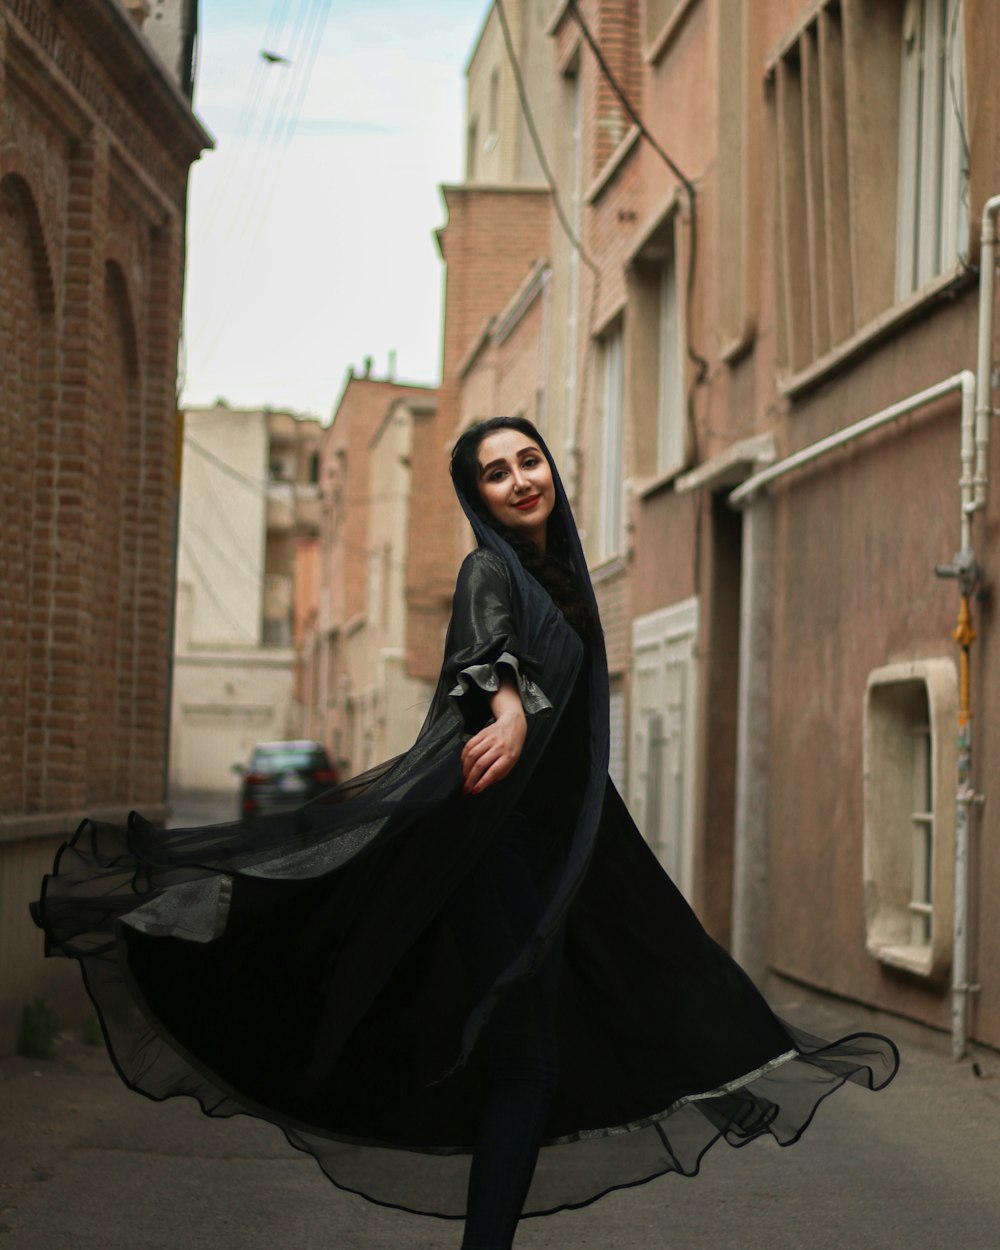 woman in black hijab standing on the street during daytime